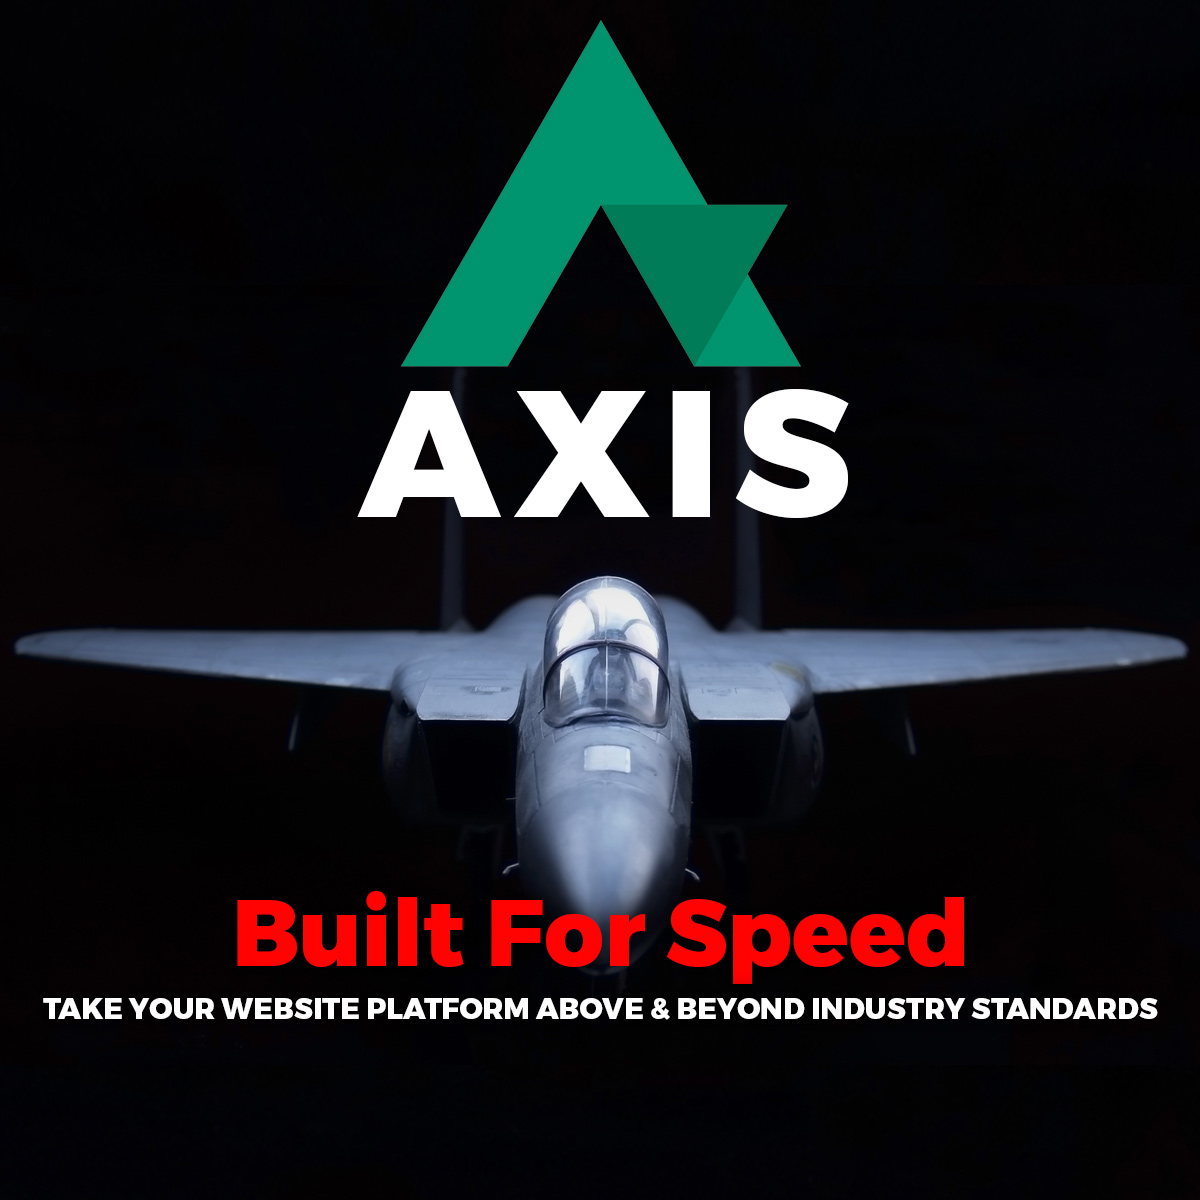 Axis Websites Built For Speed